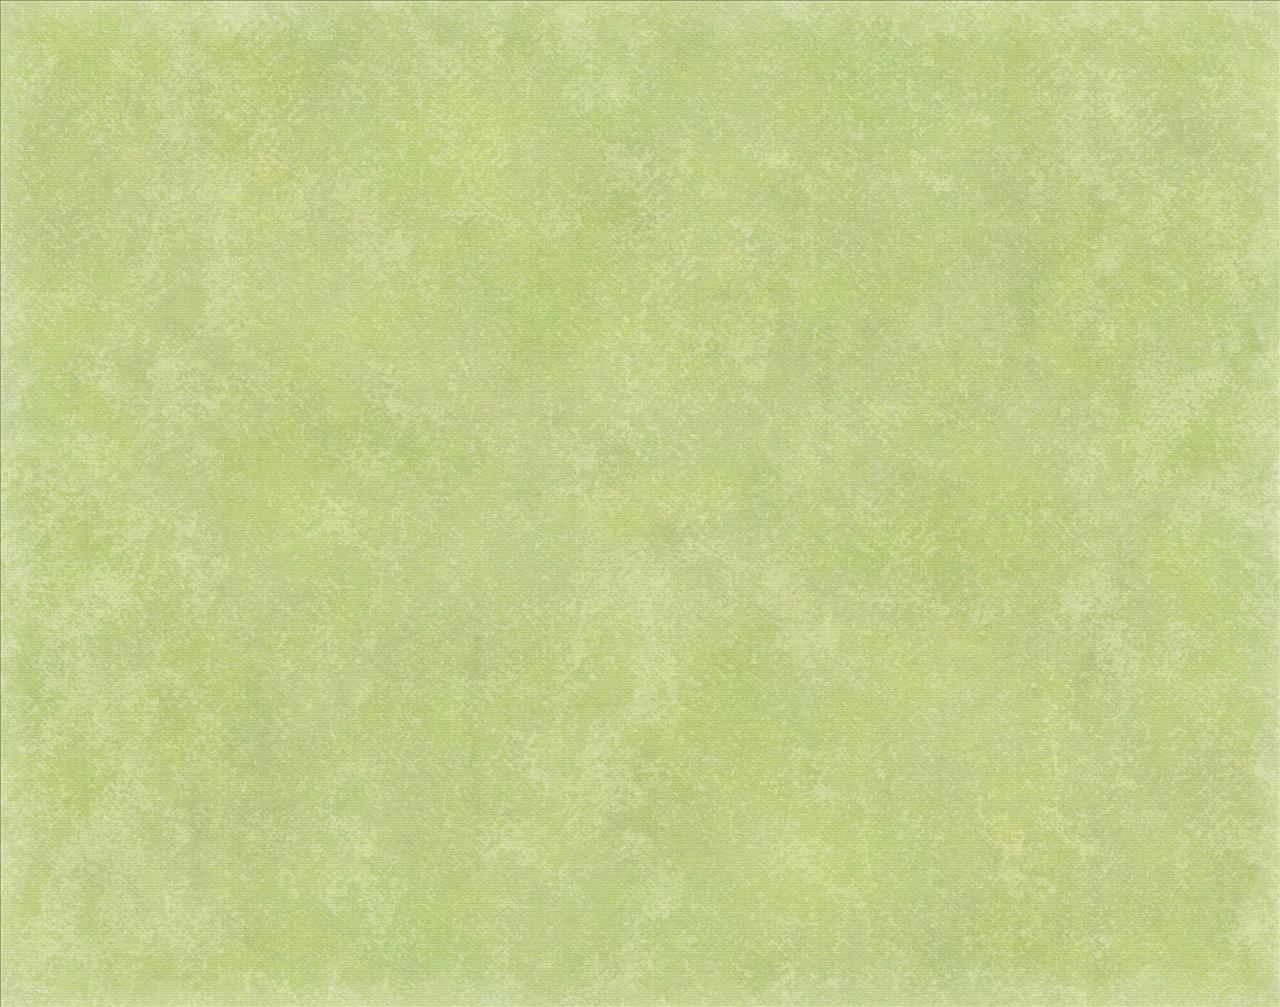 Free download Pale Green Background Pale greenjpg [1280x1007] for your Desktop, Mobile & Tablet. Explore Light Green Background. Light Green Wallpaper, Light Blue Green Wallpaper, Light Green Textured Wallpaper